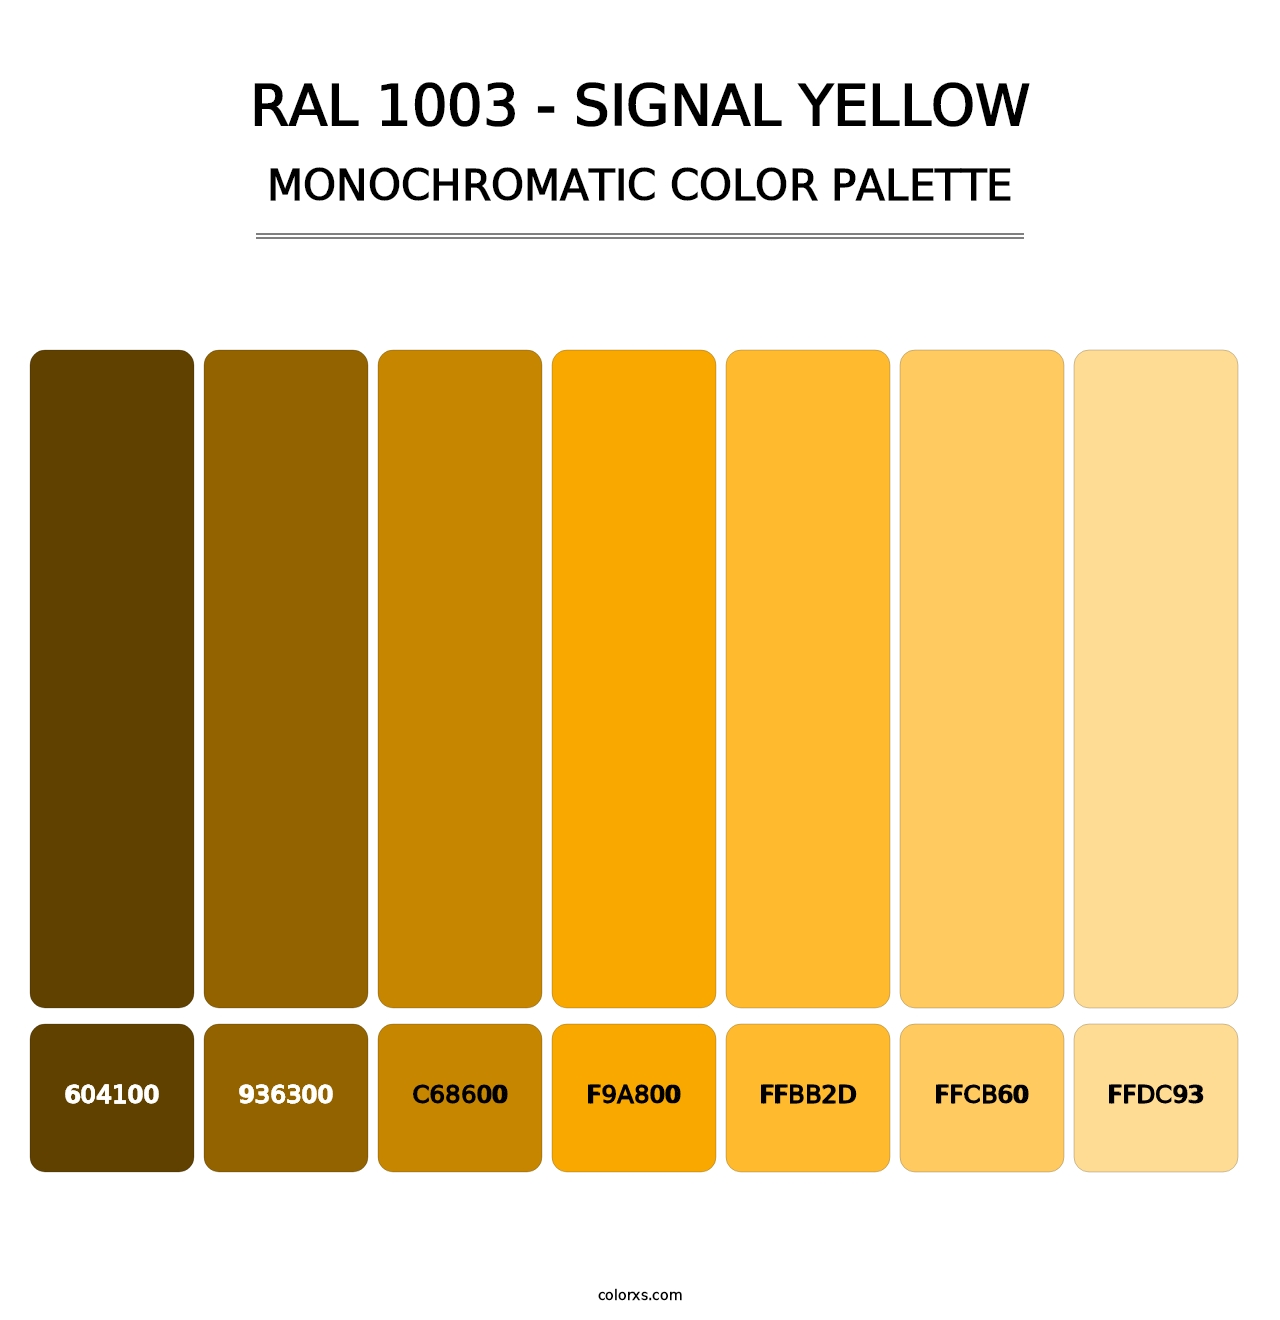 RAL 1003 - Signal Yellow - Monochromatic Color Palette